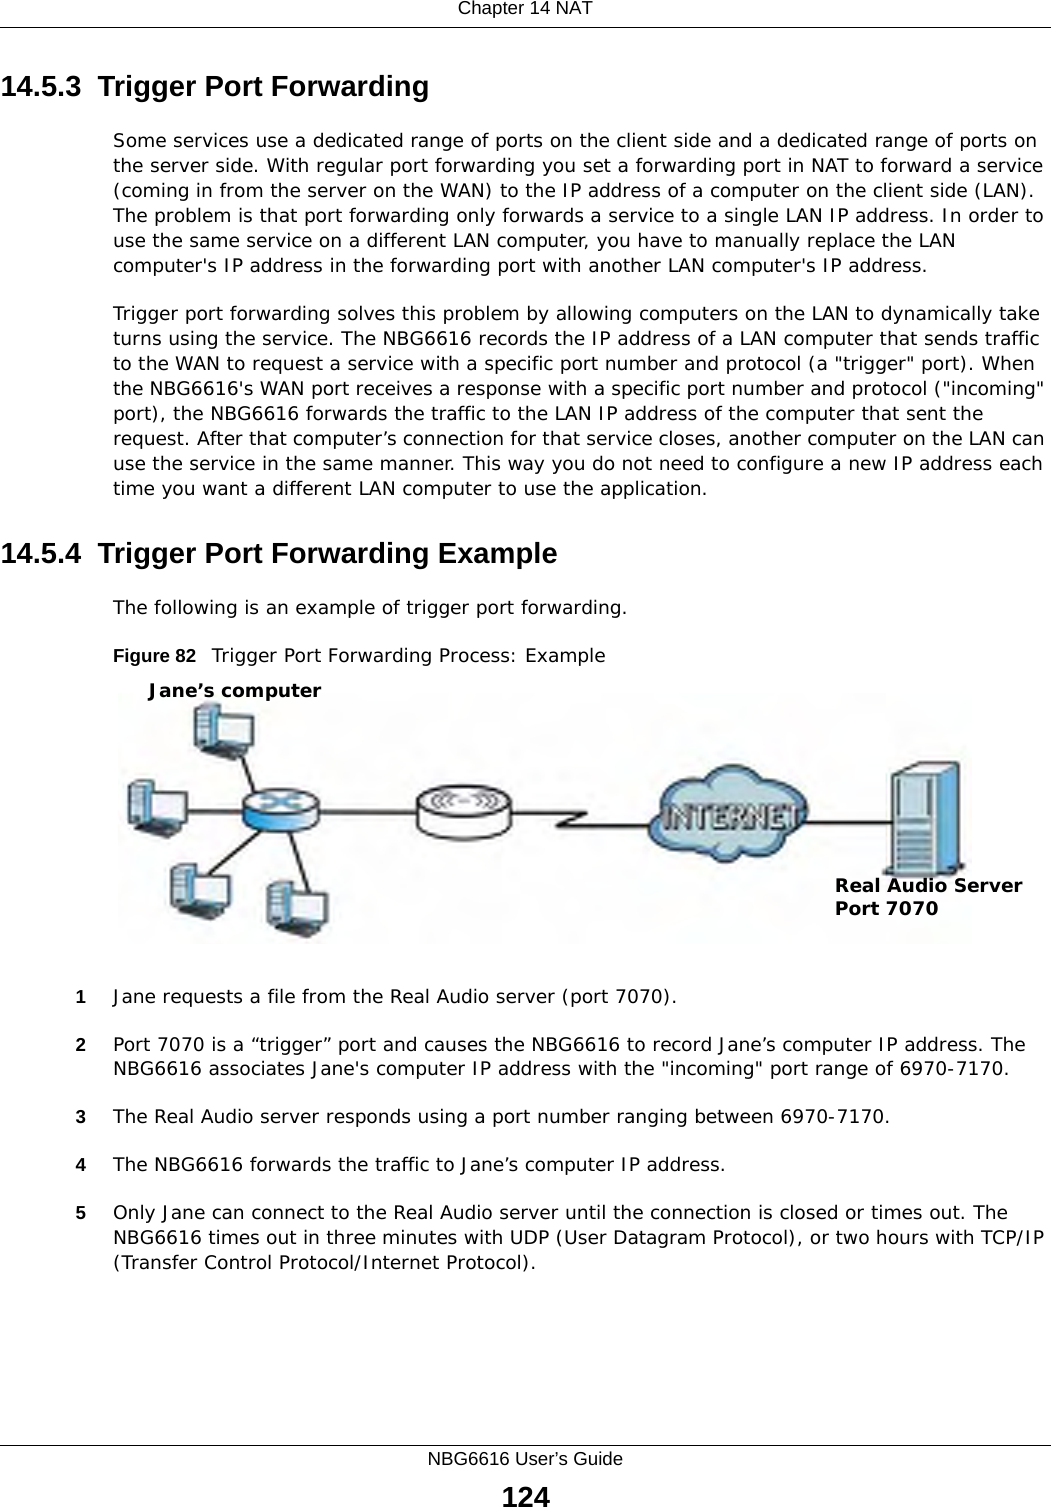 Chapter 14 NATNBG6616 User’s Guide12414.5.3  Trigger Port Forwarding Some services use a dedicated range of ports on the client side and a dedicated range of ports on the server side. With regular port forwarding you set a forwarding port in NAT to forward a service (coming in from the server on the WAN) to the IP address of a computer on the client side (LAN). The problem is that port forwarding only forwards a service to a single LAN IP address. In order to use the same service on a different LAN computer, you have to manually replace the LAN computer&apos;s IP address in the forwarding port with another LAN computer&apos;s IP address. Trigger port forwarding solves this problem by allowing computers on the LAN to dynamically take turns using the service. The NBG6616 records the IP address of a LAN computer that sends traffic to the WAN to request a service with a specific port number and protocol (a &quot;trigger&quot; port). When the NBG6616&apos;s WAN port receives a response with a specific port number and protocol (&quot;incoming&quot; port), the NBG6616 forwards the traffic to the LAN IP address of the computer that sent the request. After that computer’s connection for that service closes, another computer on the LAN can use the service in the same manner. This way you do not need to configure a new IP address each time you want a different LAN computer to use the application.14.5.4  Trigger Port Forwarding Example The following is an example of trigger port forwarding.Figure 82   Trigger Port Forwarding Process: Example1Jane requests a file from the Real Audio server (port 7070).2Port 7070 is a “trigger” port and causes the NBG6616 to record Jane’s computer IP address. The NBG6616 associates Jane&apos;s computer IP address with the &quot;incoming&quot; port range of 6970-7170.3The Real Audio server responds using a port number ranging between 6970-7170.4The NBG6616 forwards the traffic to Jane’s computer IP address. 5Only Jane can connect to the Real Audio server until the connection is closed or times out. The NBG6616 times out in three minutes with UDP (User Datagram Protocol), or two hours with TCP/IP (Transfer Control Protocol/Internet Protocol). Jane’s computerReal Audio ServerPort 7070